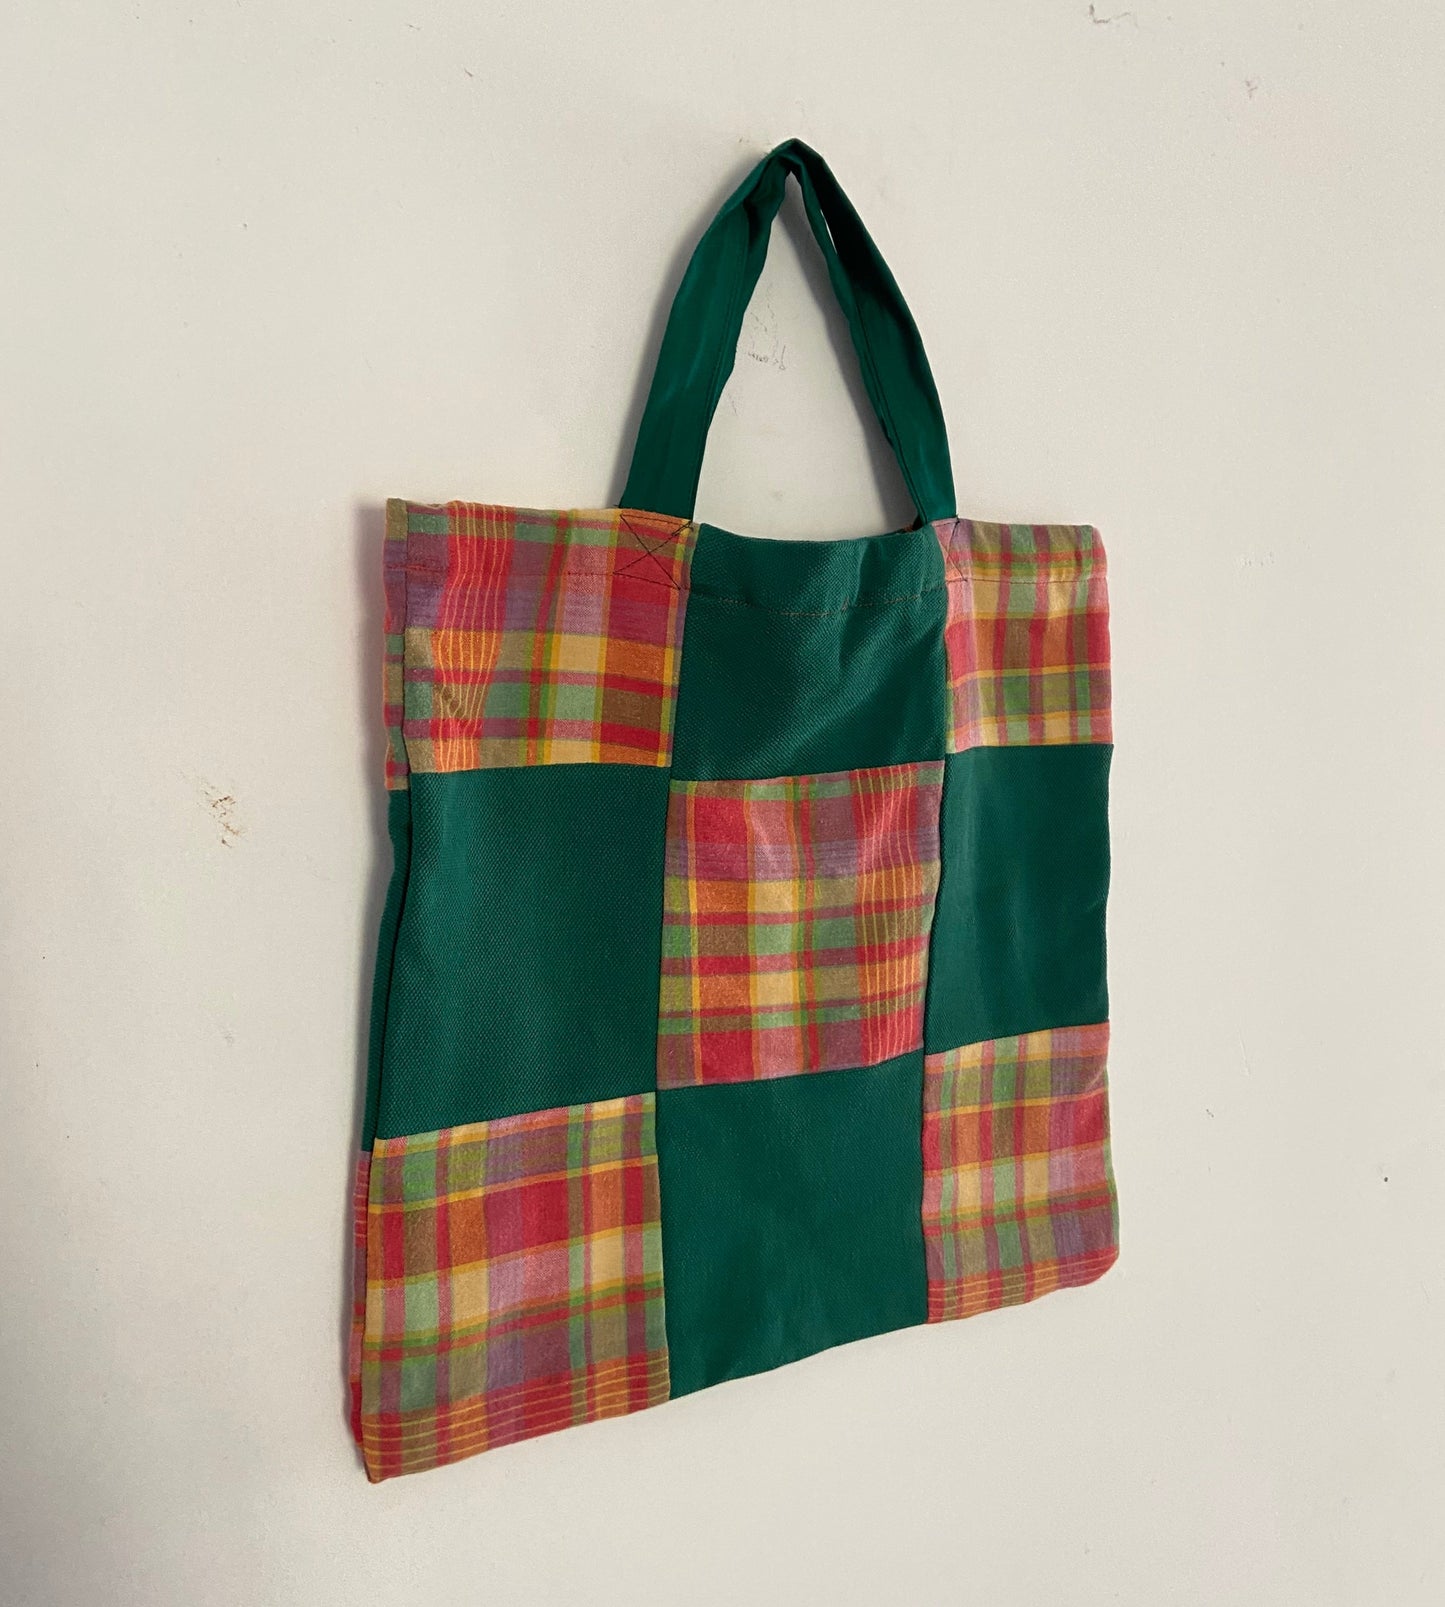 mini-tote-bag-upcycled-and-handmade-green-front-side